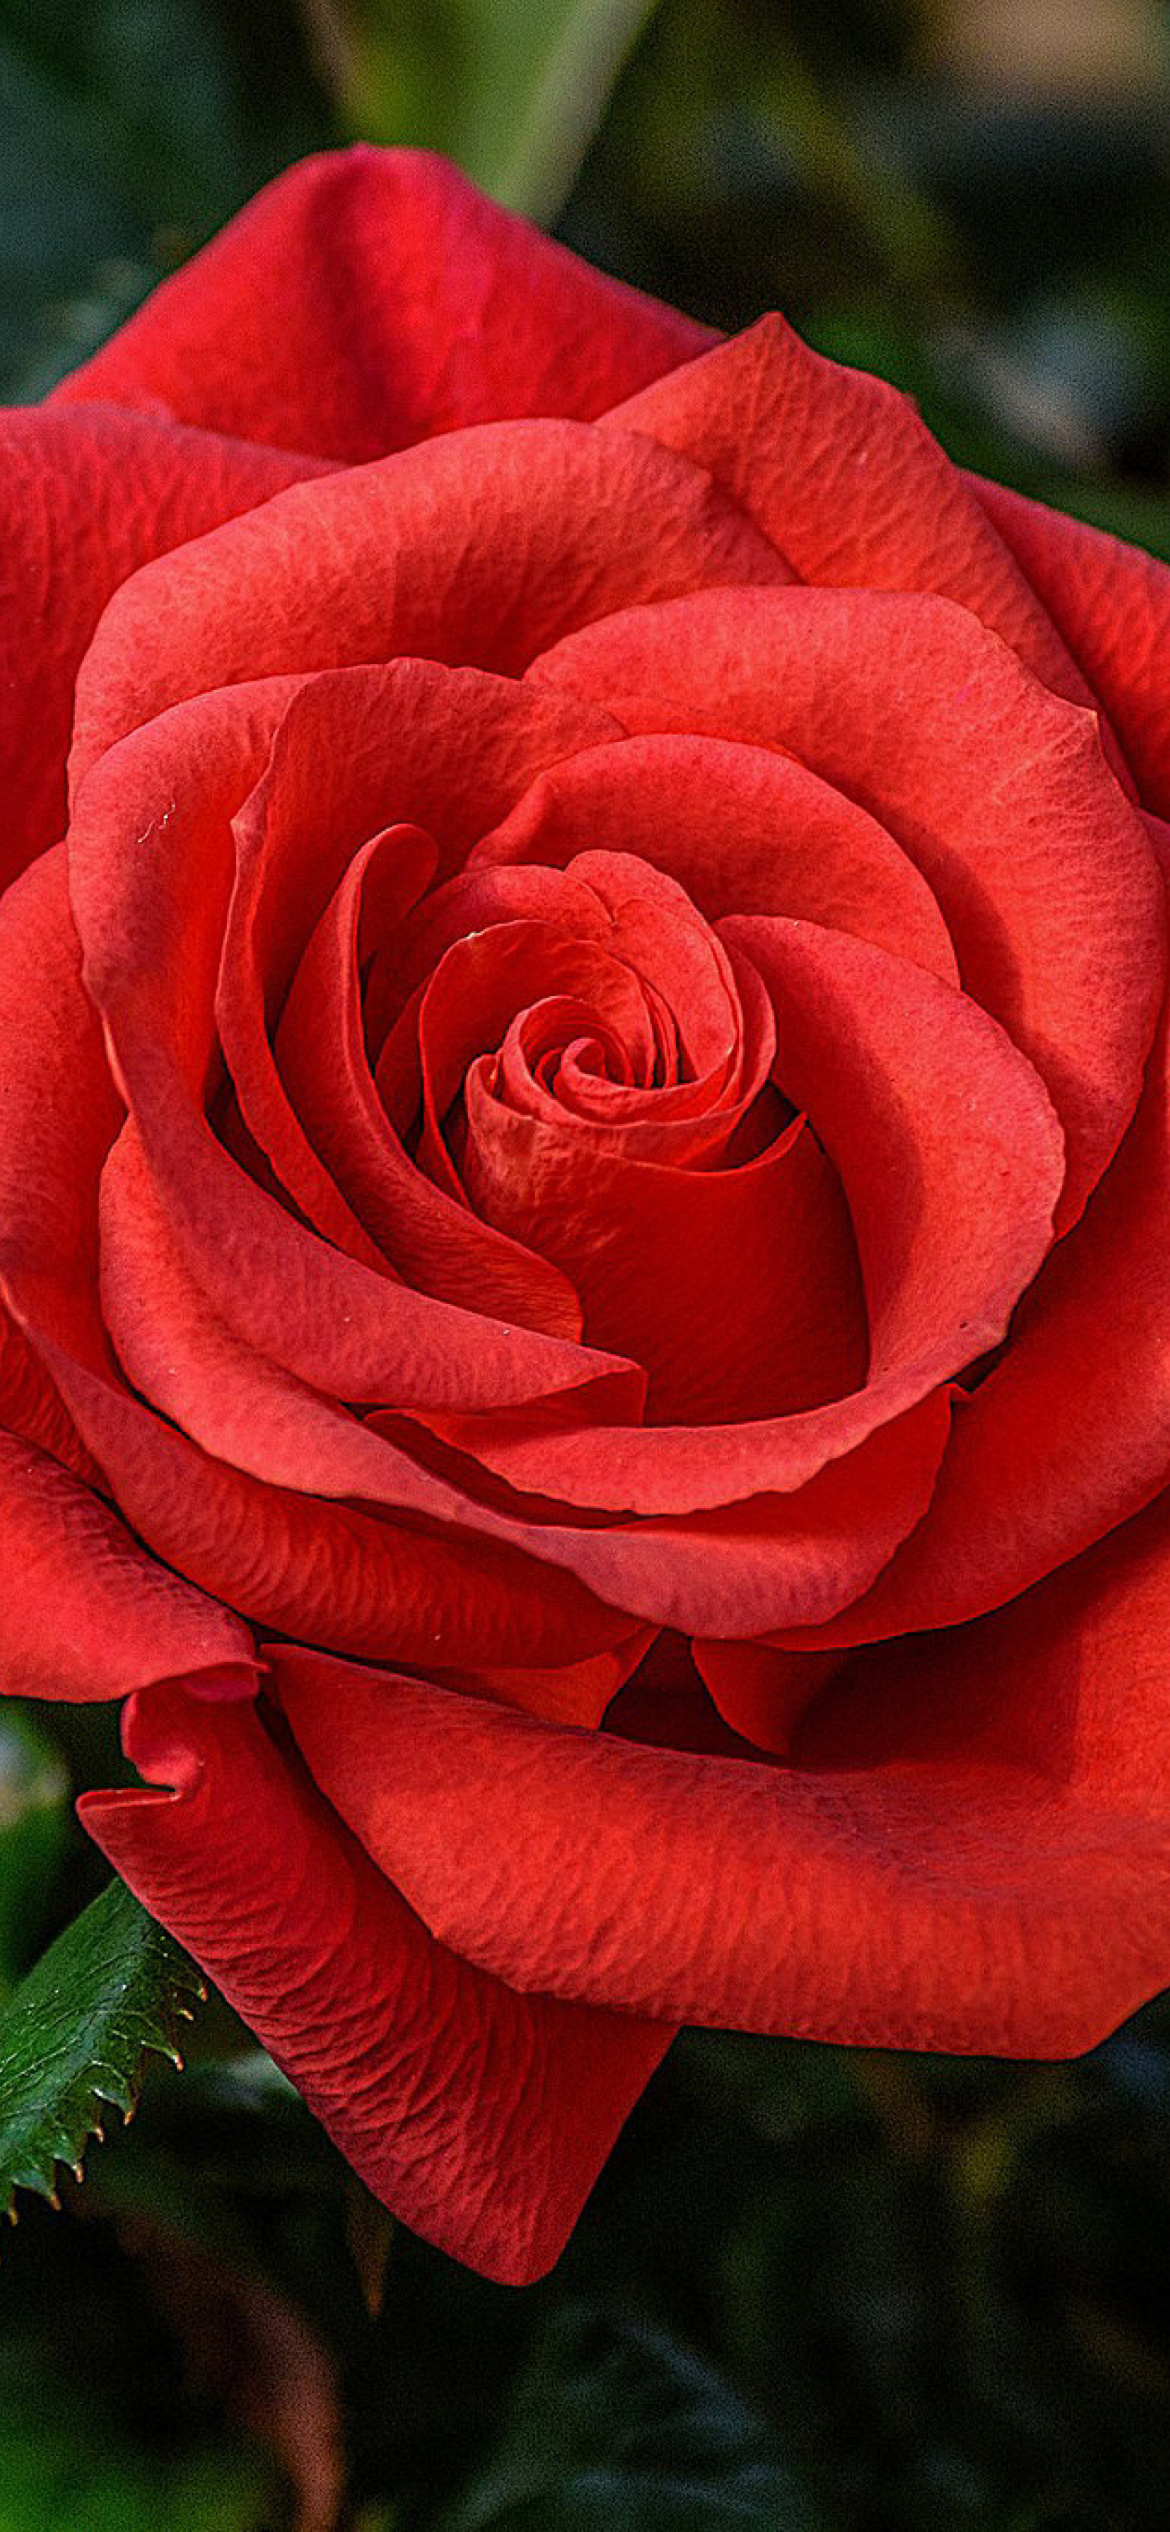 Lonely Red Rose wallpaper 1170x2532